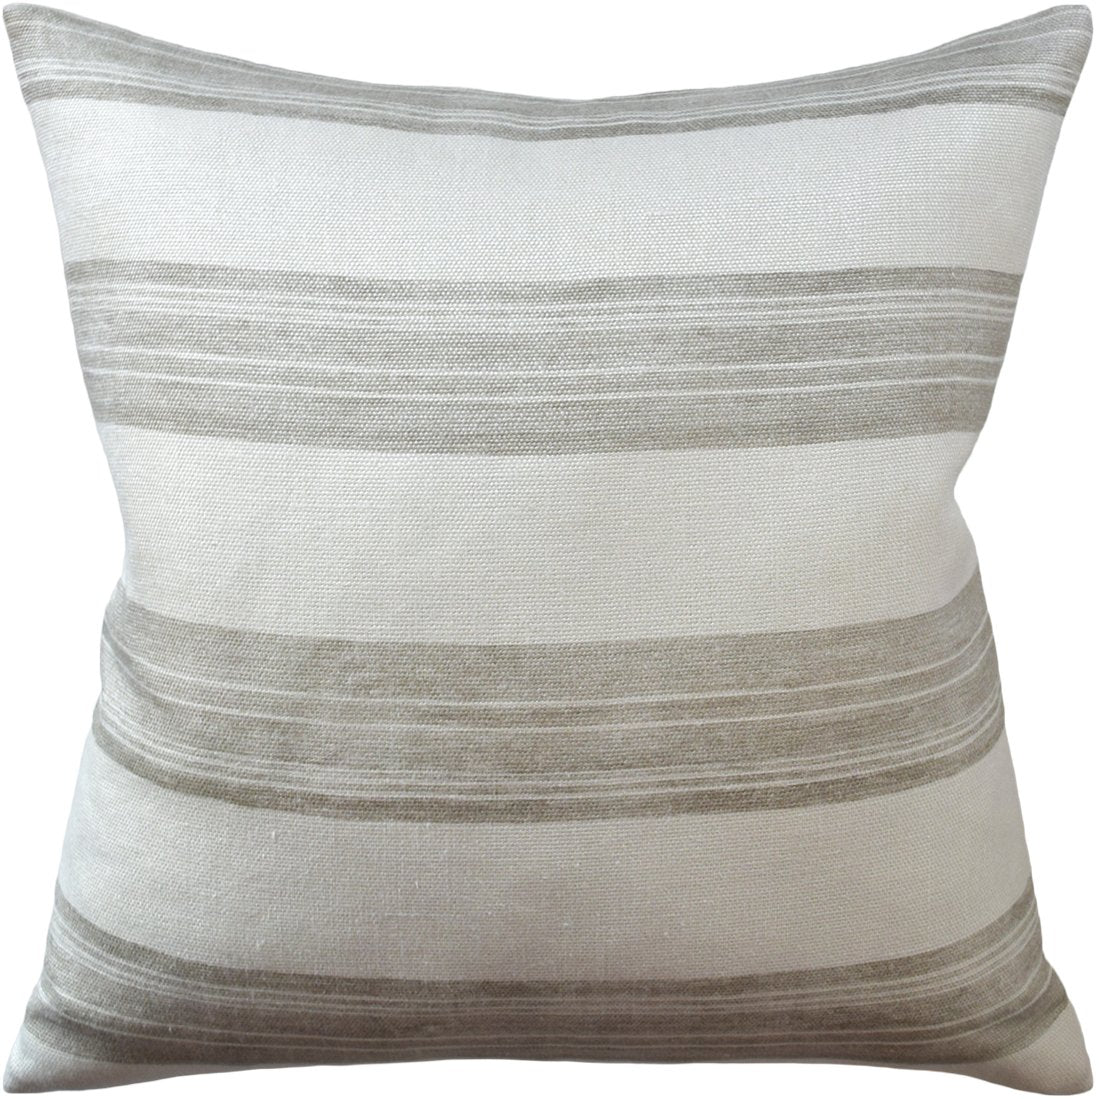 Askew Ivory and Taupe Pillow